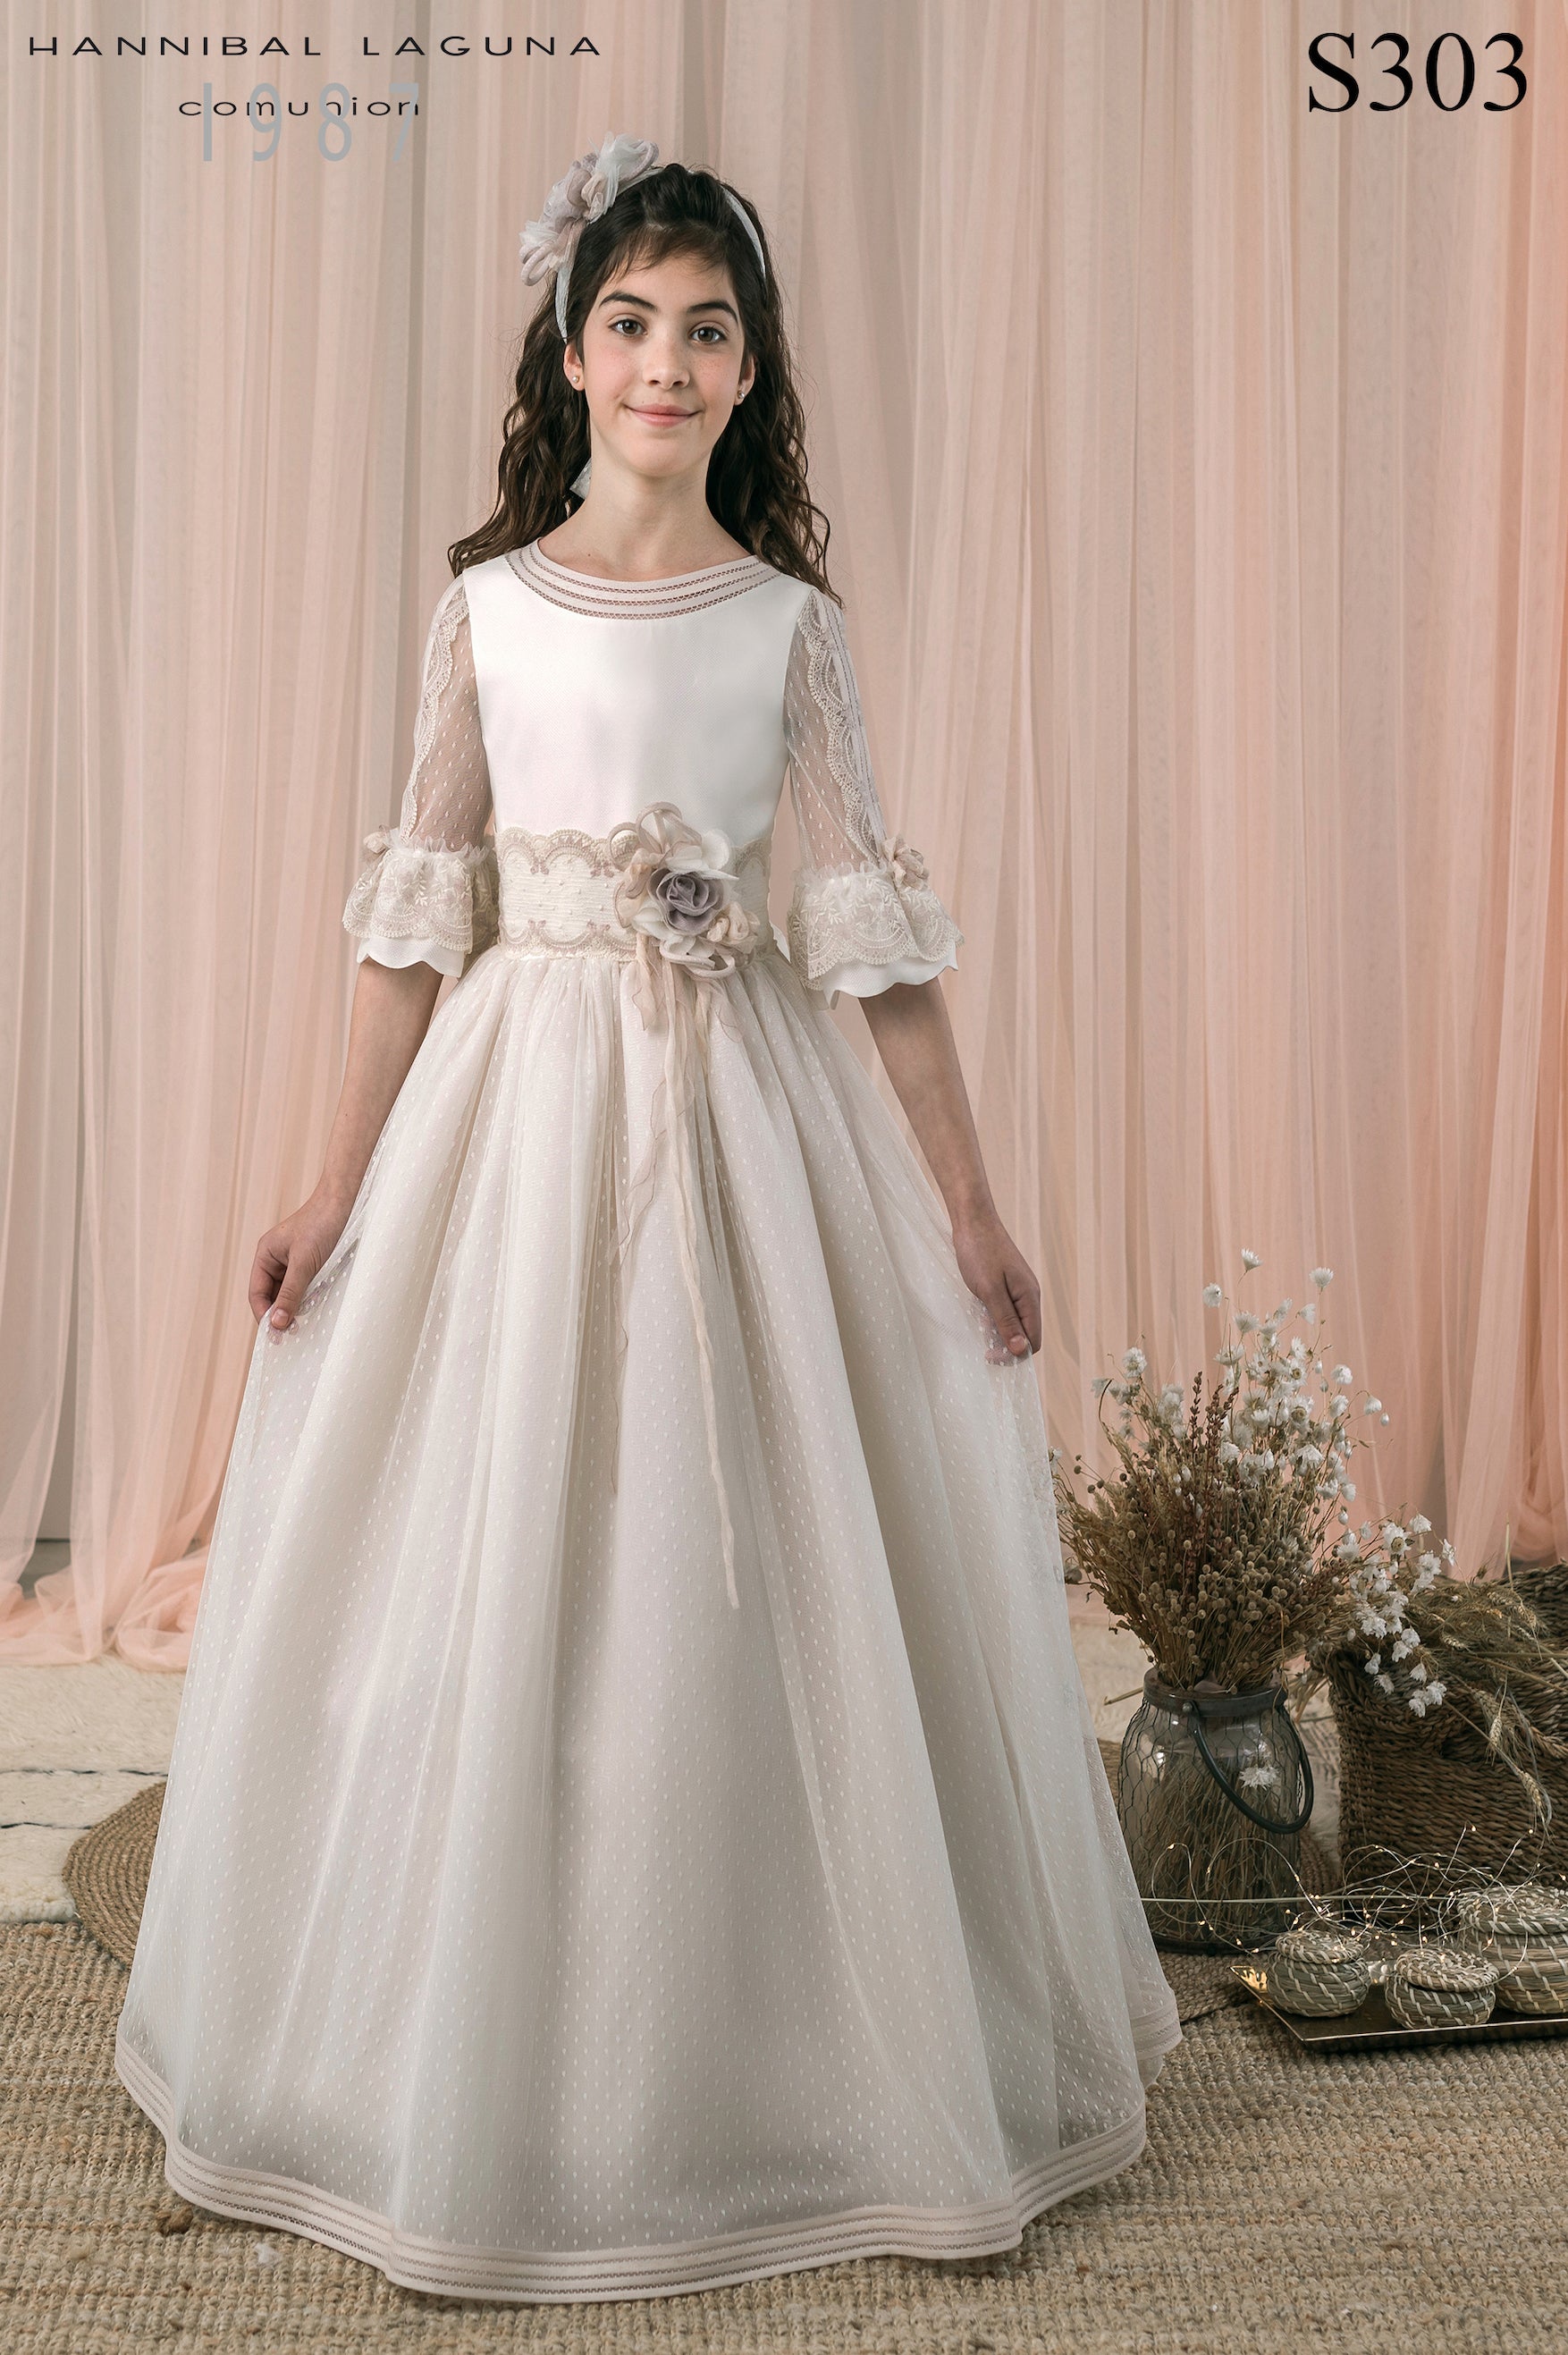 Spanish Communion Gown Hannibal – Gowns